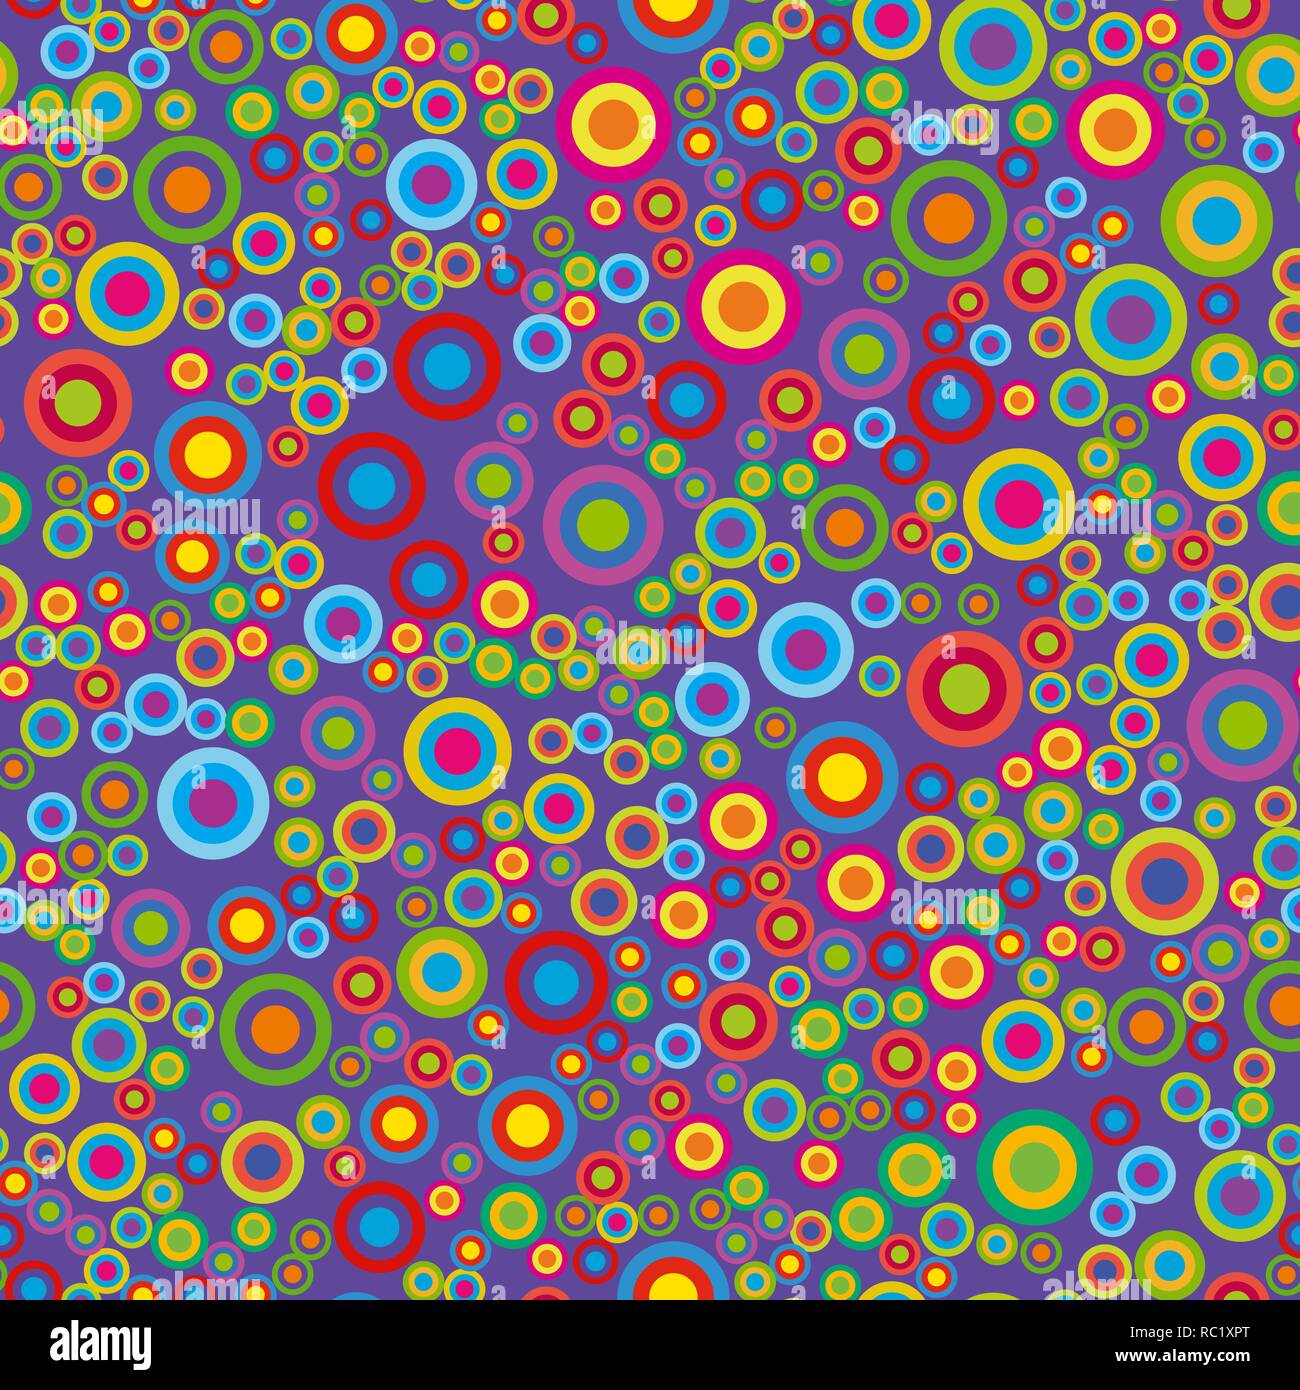 Colorful psychedelic circles on a violet background. Stock Vector